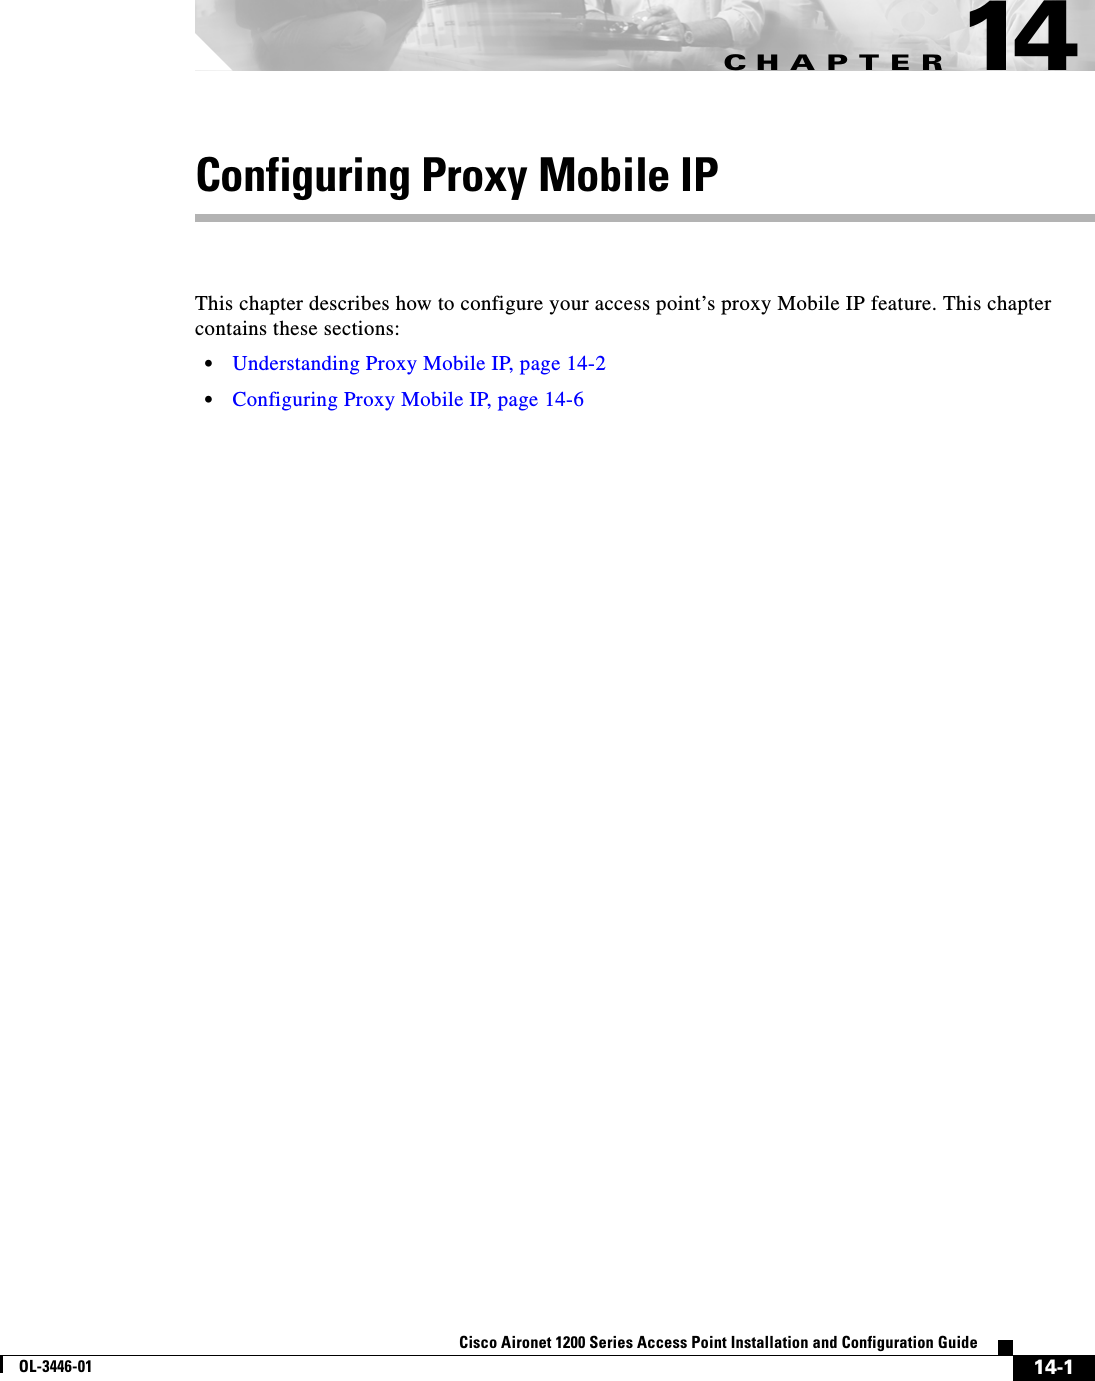 CHAPTER14-1Cisco Aironet 1200 Series Access Point Installation and Configuration GuideOL-3446-0114Configuring Proxy Mobile IPThis chapter describes how to configure your access point’s proxy Mobile IP feature. This chapter contains these sections:•Understanding Proxy Mobile IP, page 14-2•Configuring Proxy Mobile IP, page 14-6